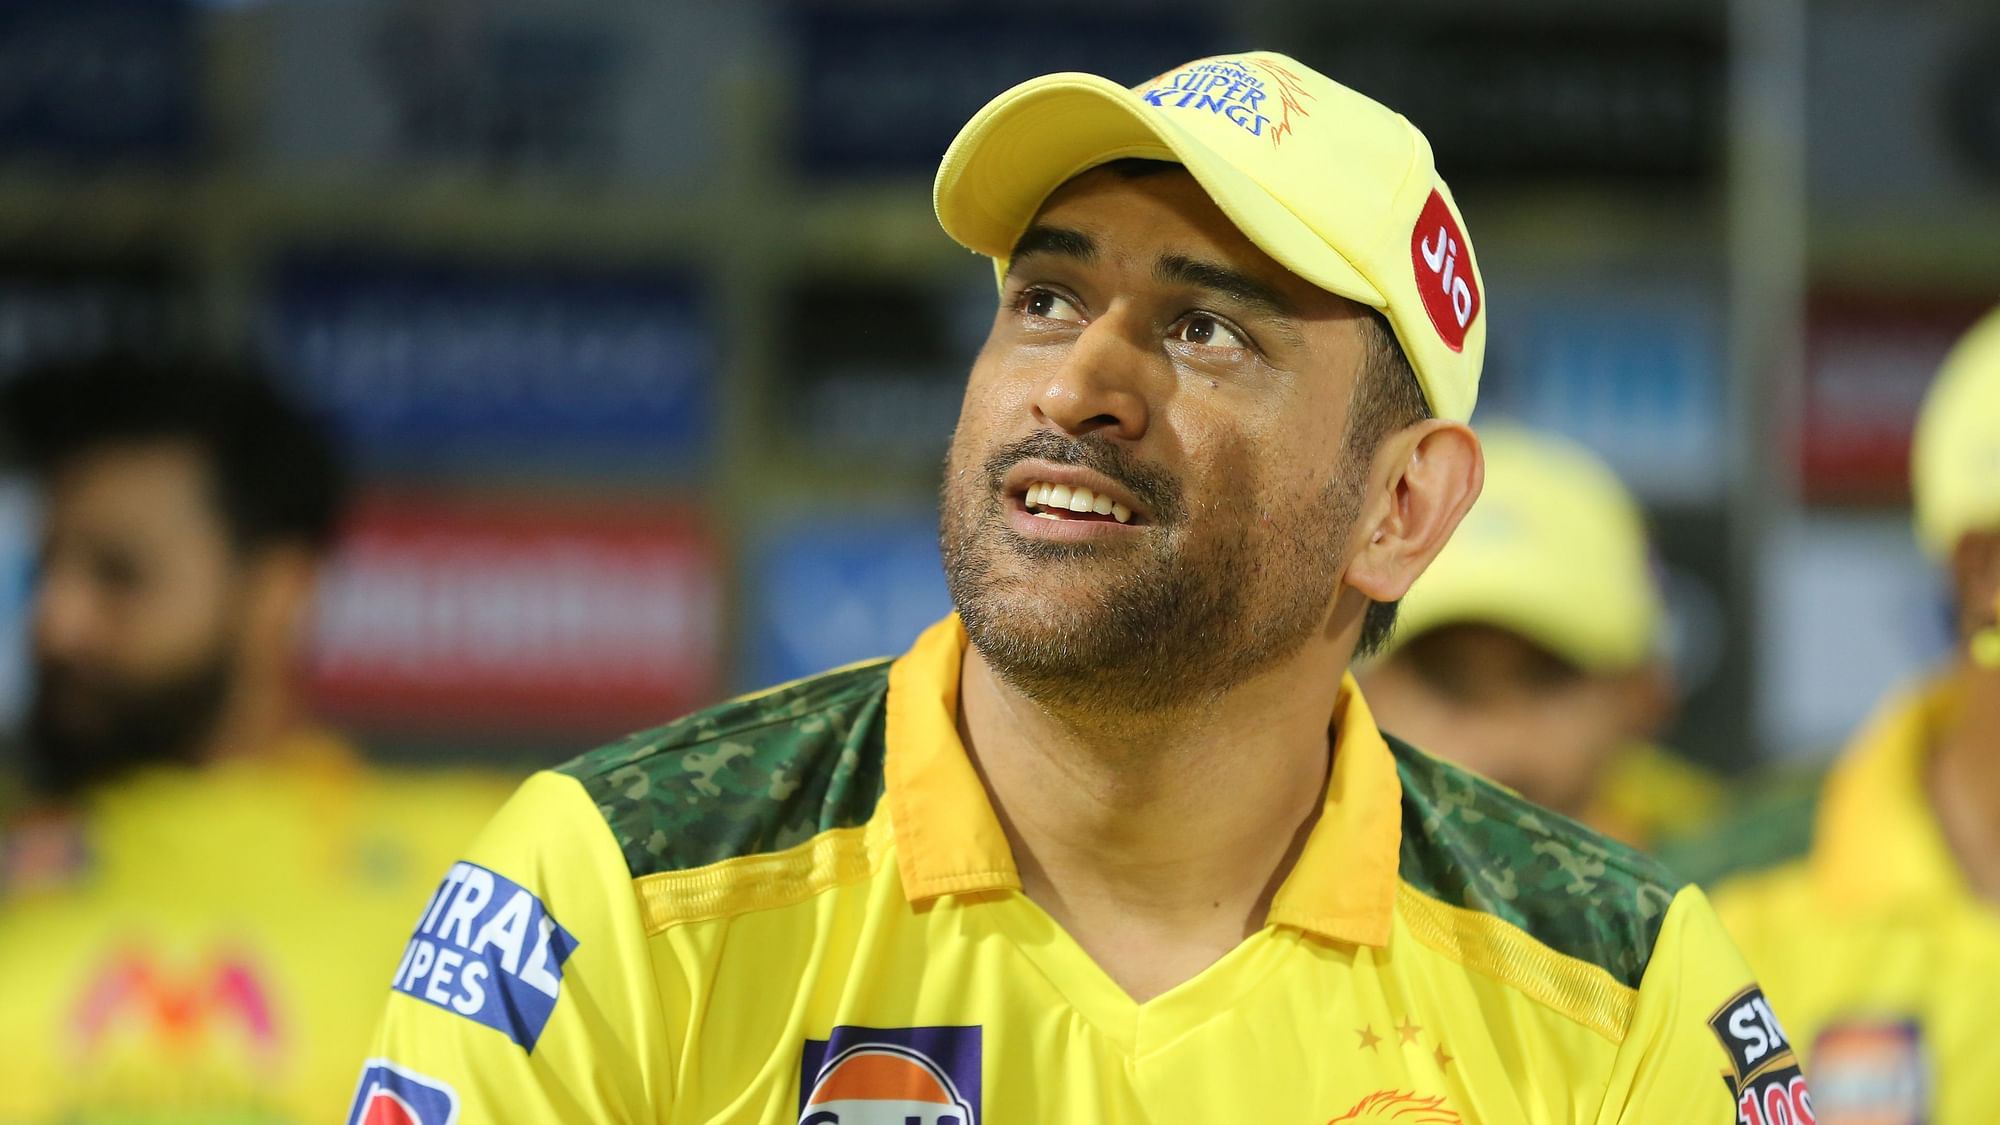 MS Dhoni played his 200th match for Chennai Super Kings on Friday night.